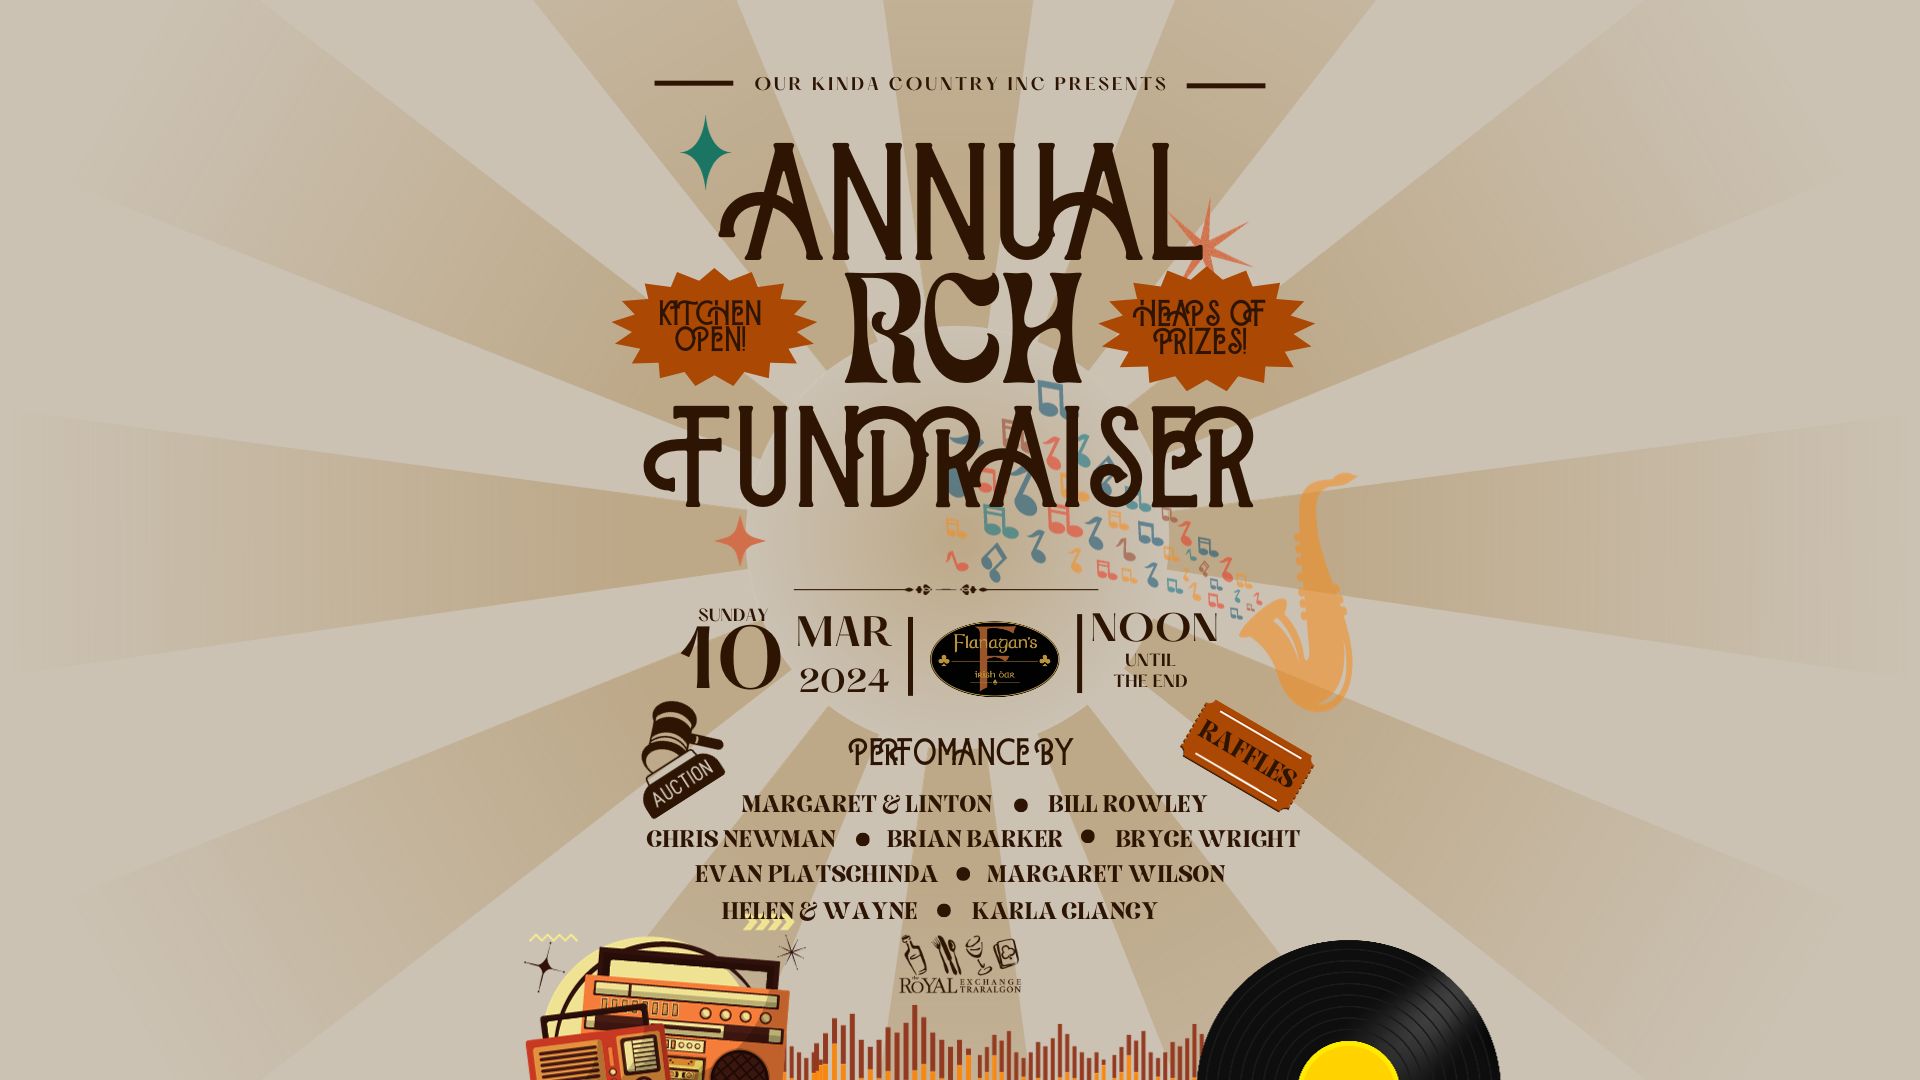 Our Kinda Country presents Annual RCH Fundraiser